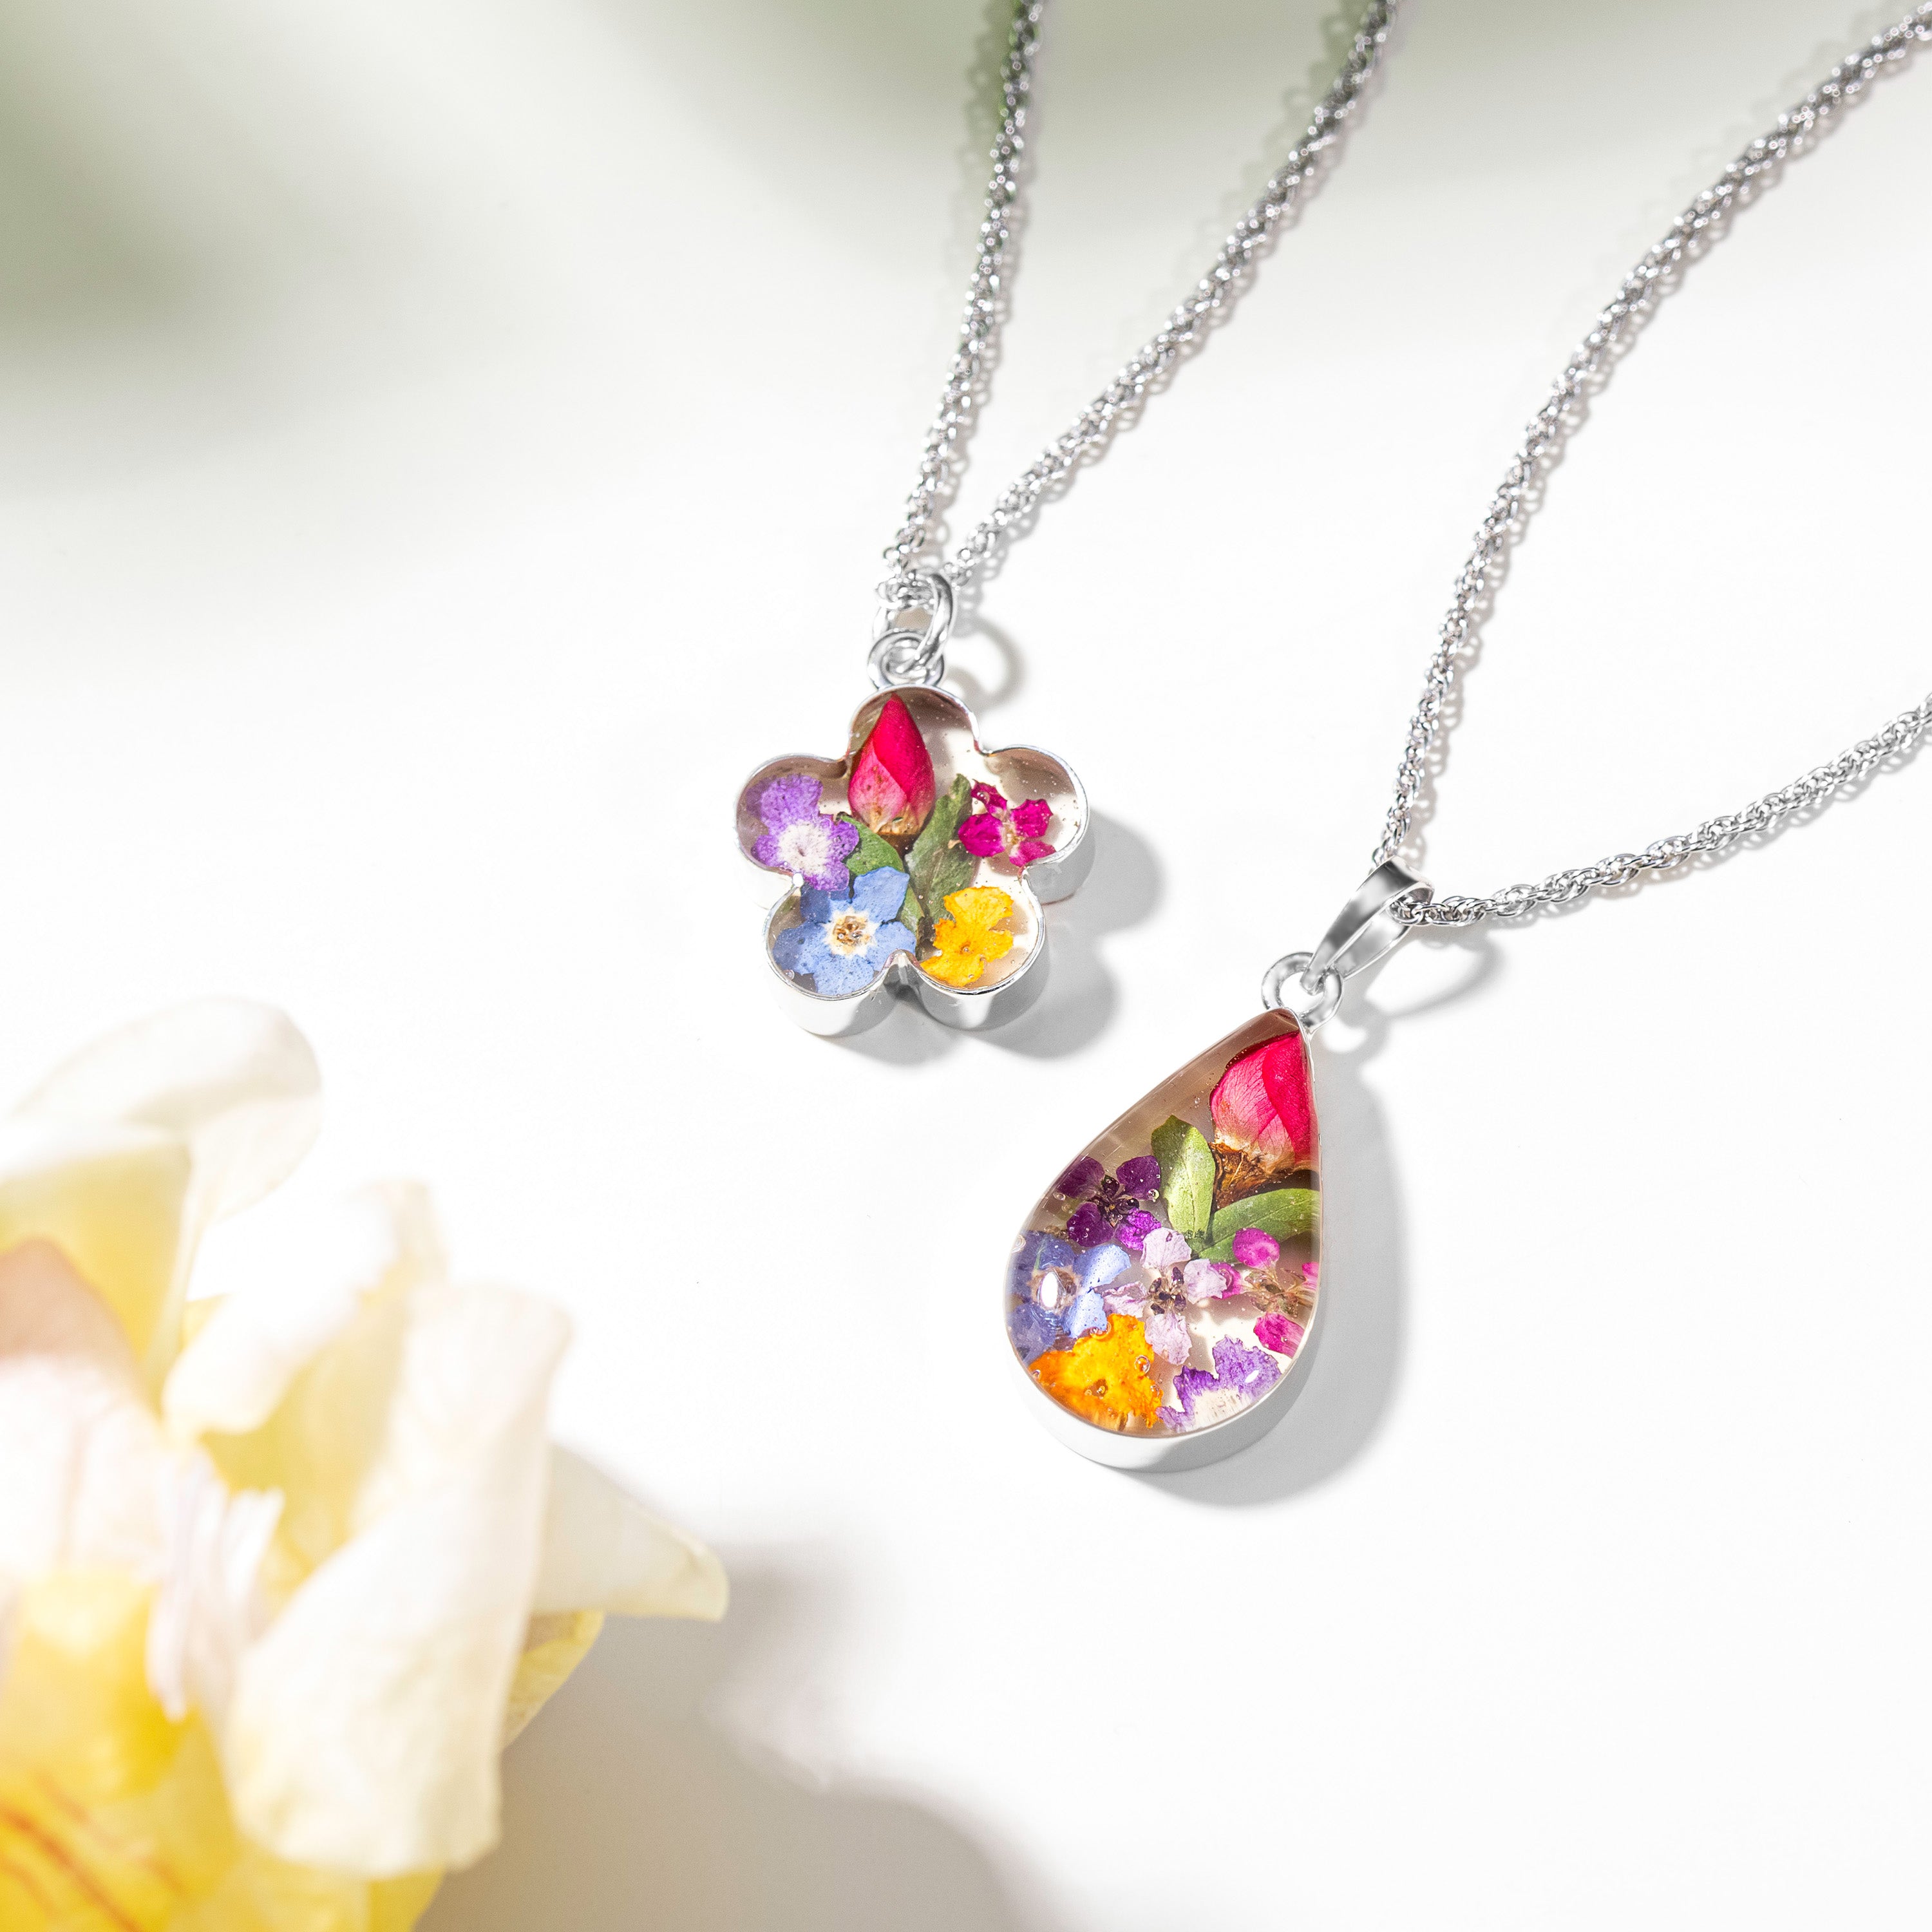 Eternal Bloom Teardrop Necklace with Multi Colored Flowers